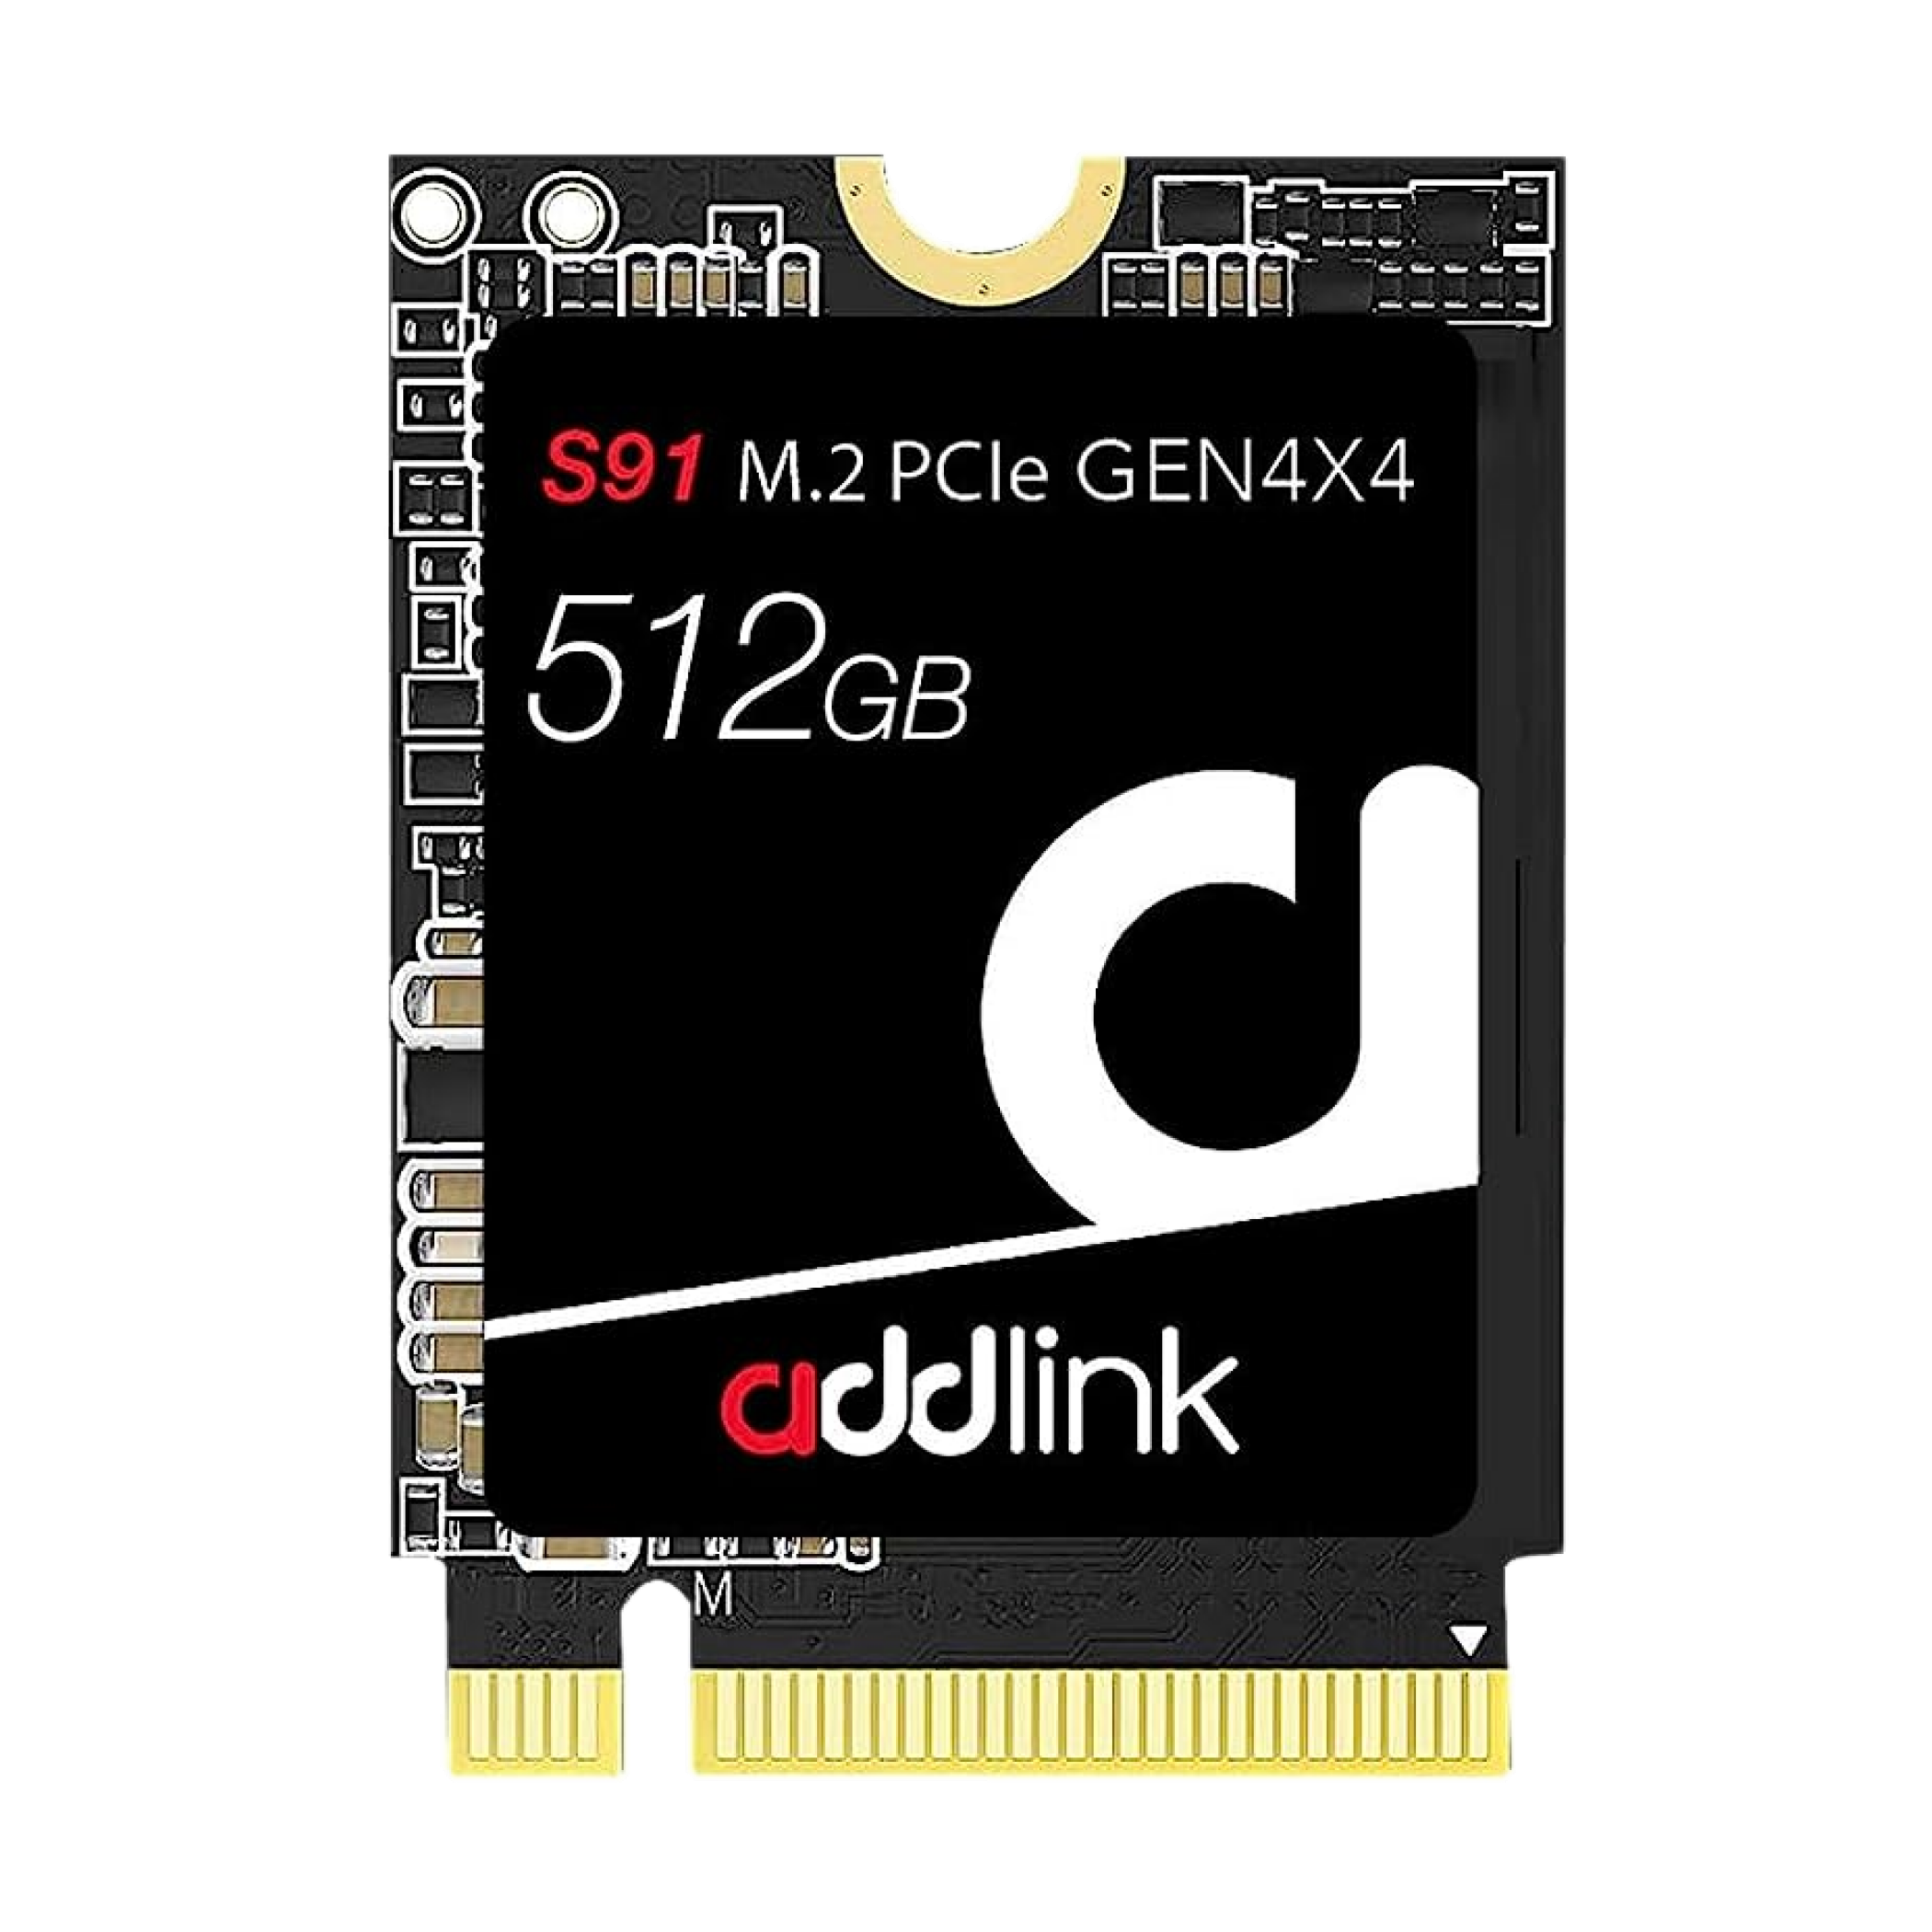 The Addlink S91 SSD.